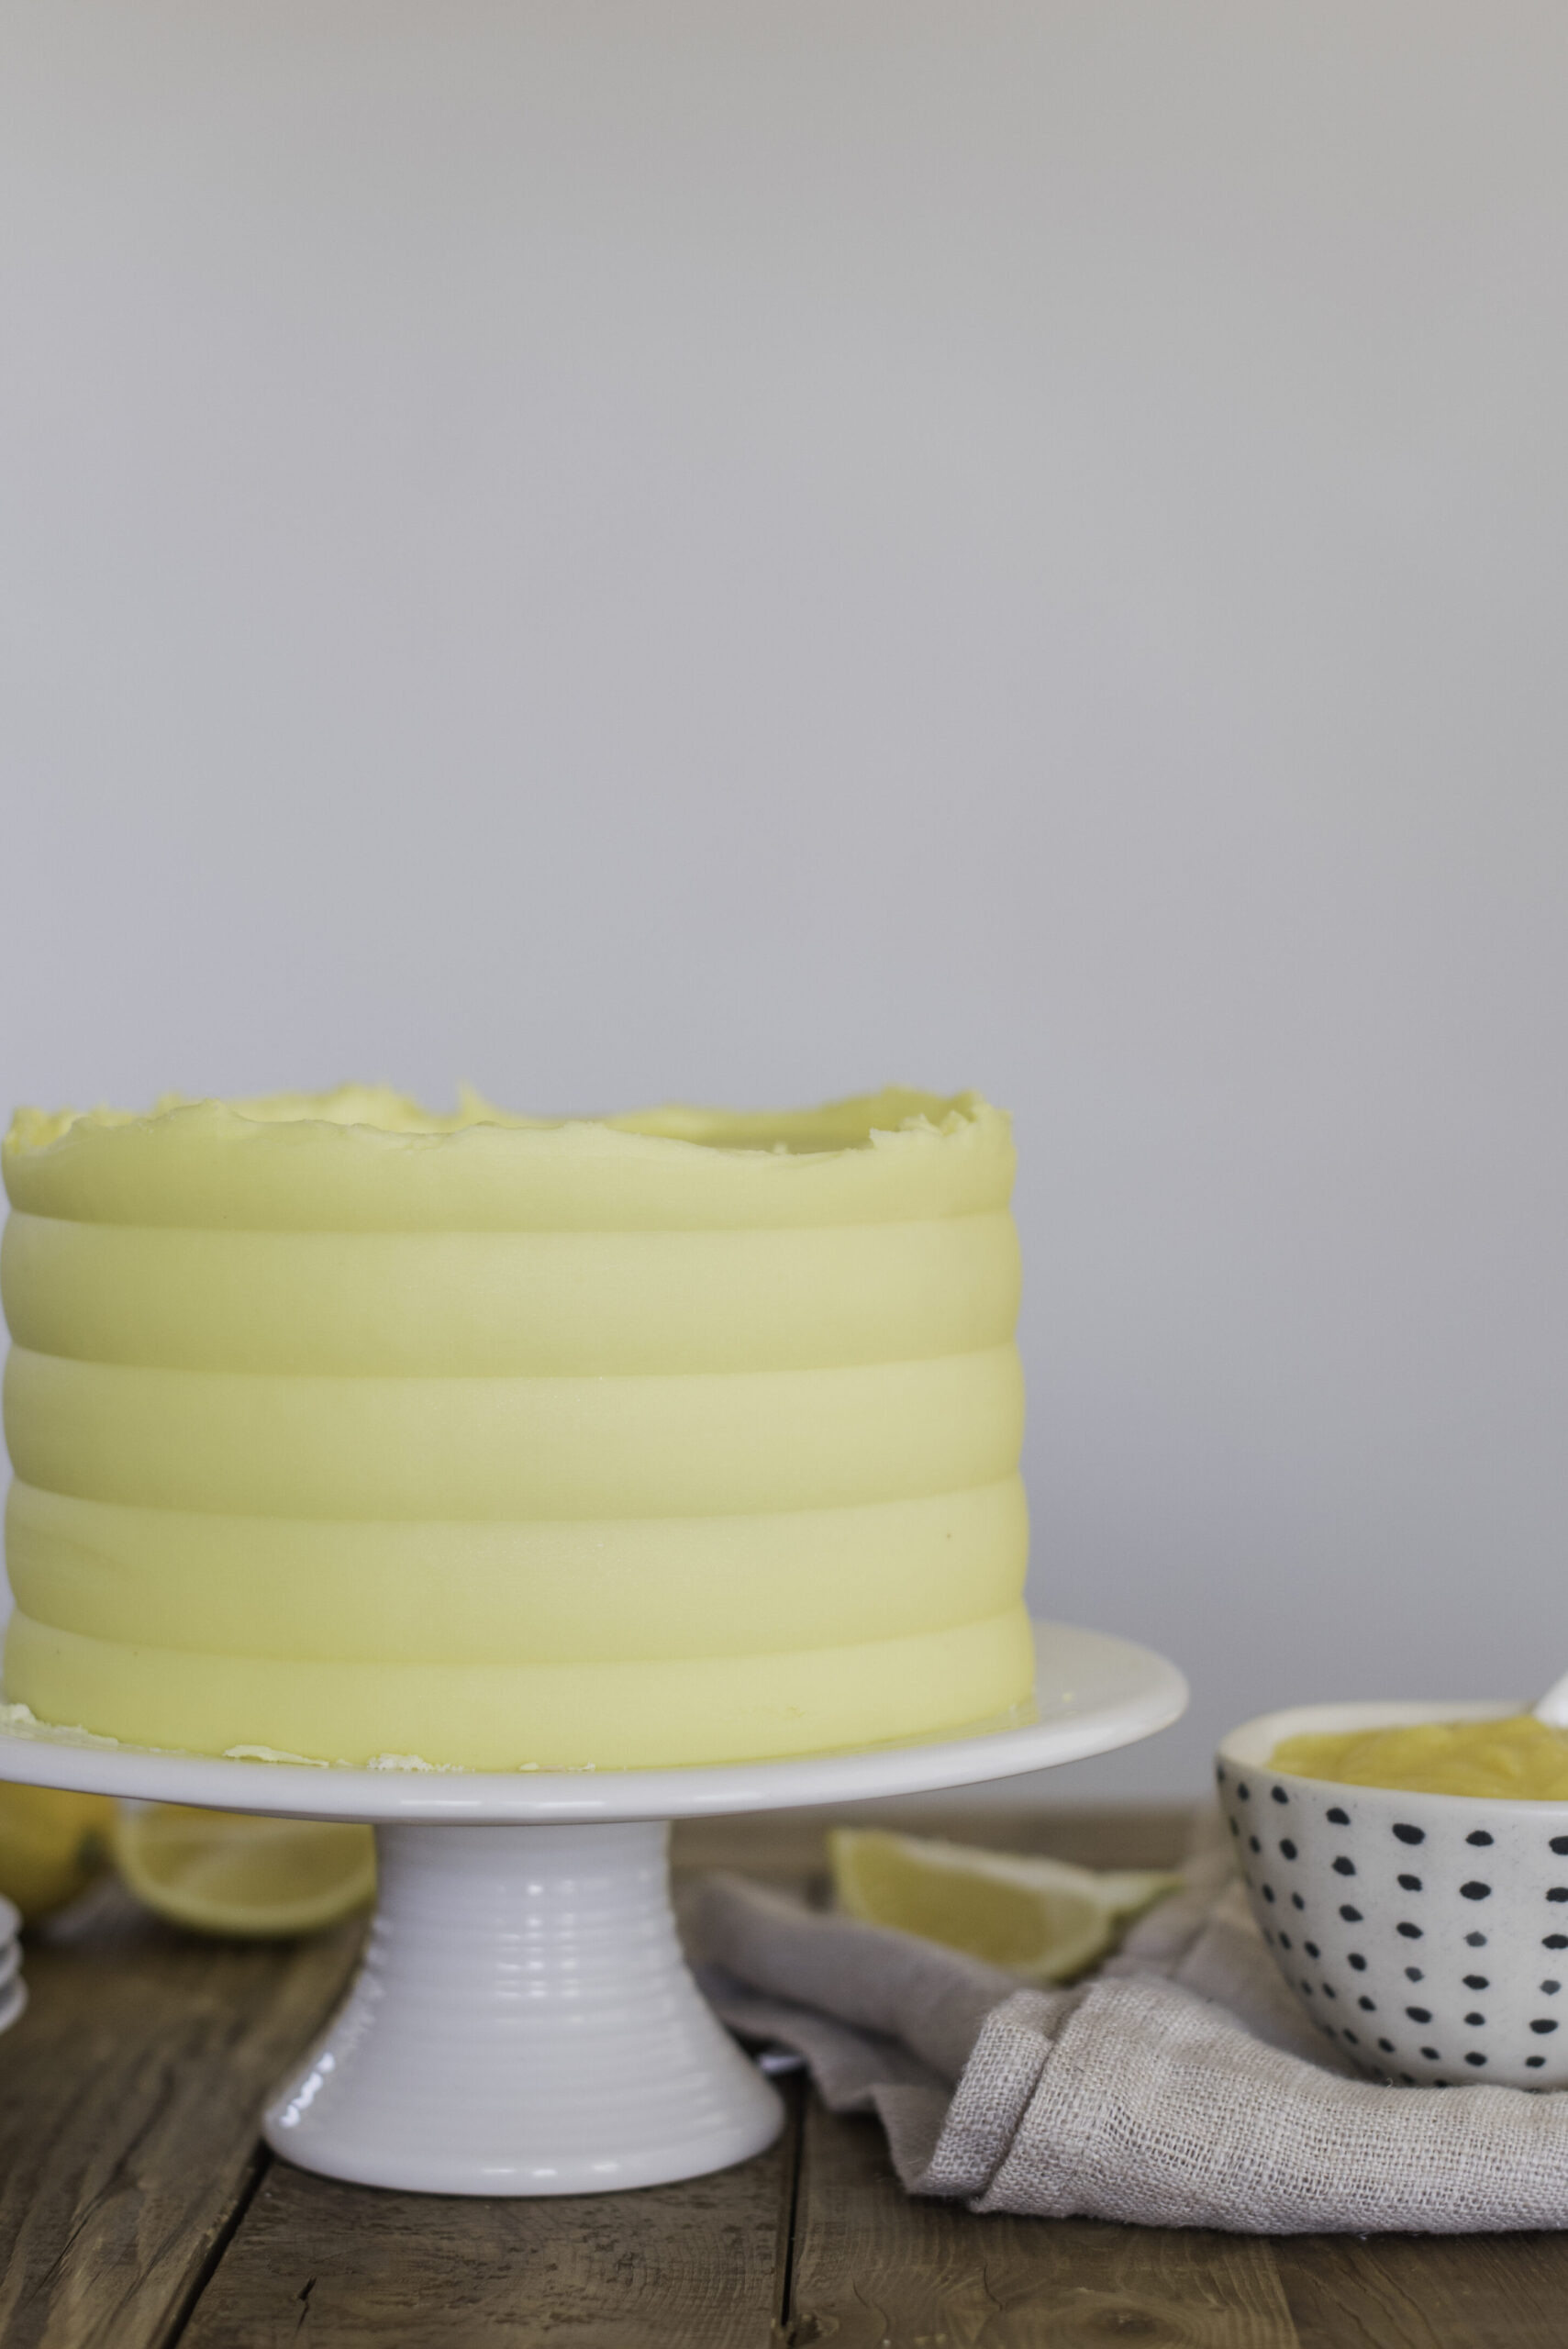 A lemon cake on a white cake stand with lemons on the table.